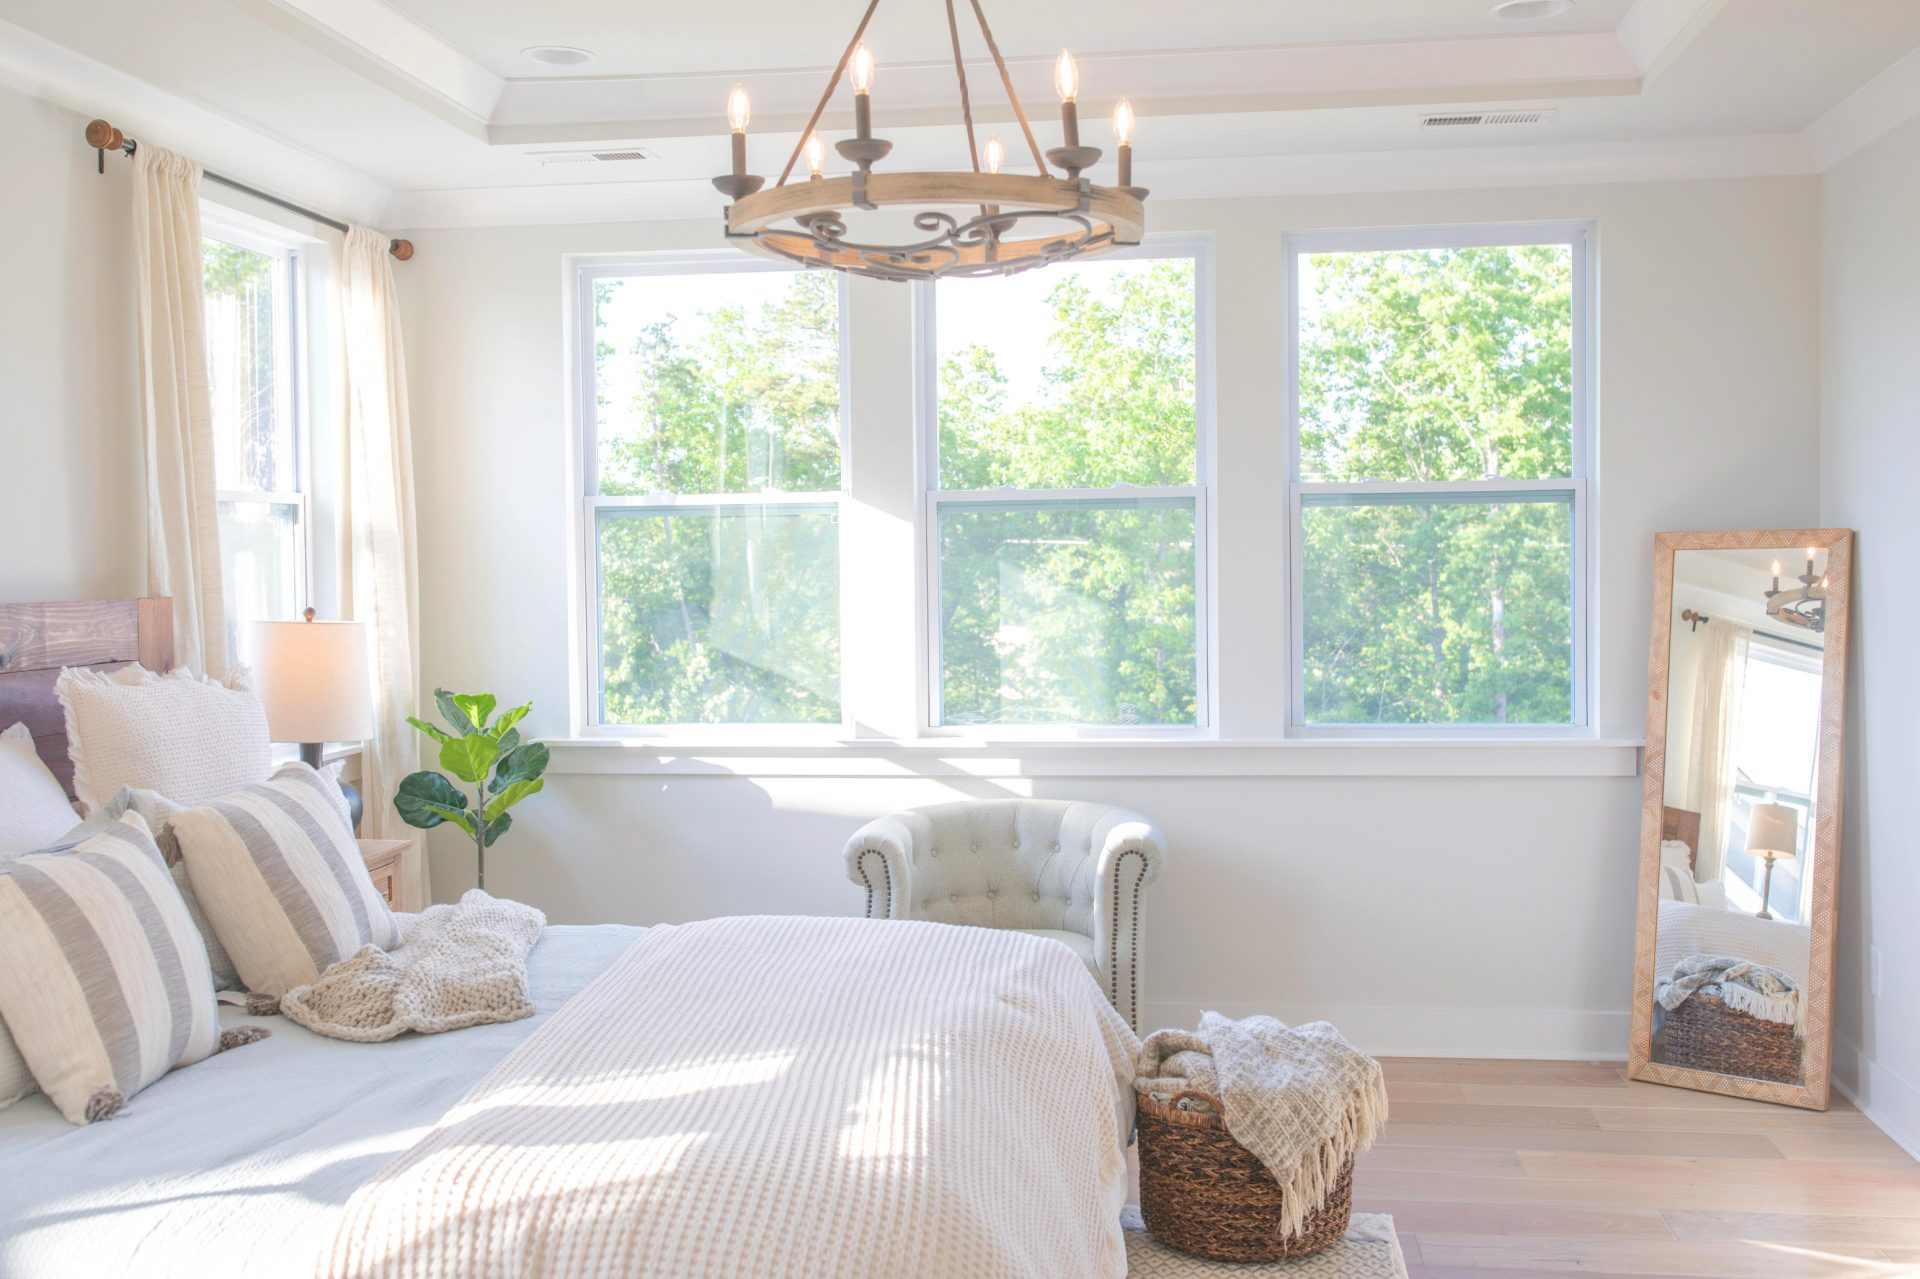 creamy bedroom, master bedroom, cottage, drapes, bedding, cozy bedroom, quilt, ivory bed, ivory quilt bedroom, master bedroom decor, neutral colors, target, HomeGoods, hobby lobby, bedding, hardwood floors, end tables, black curtain rods, linen drapes